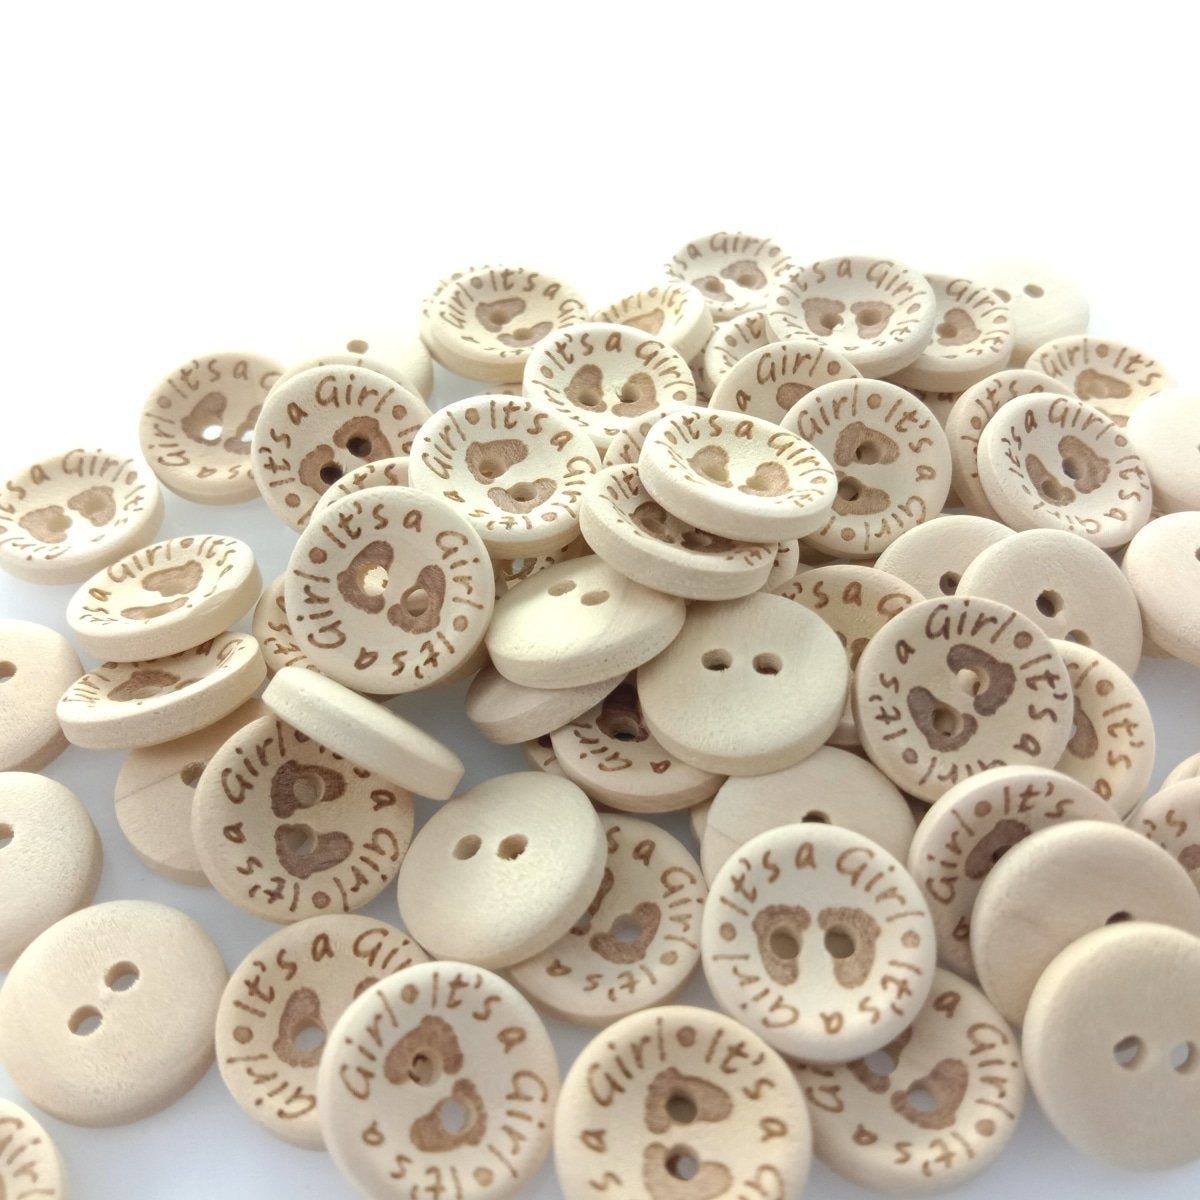 15/20/25mm It's a Girl/Boy Wooden Button Natural Wood Sewing Baby Clothing Buttons - It's a Girl 15mm 50pcs - - Asia Sell